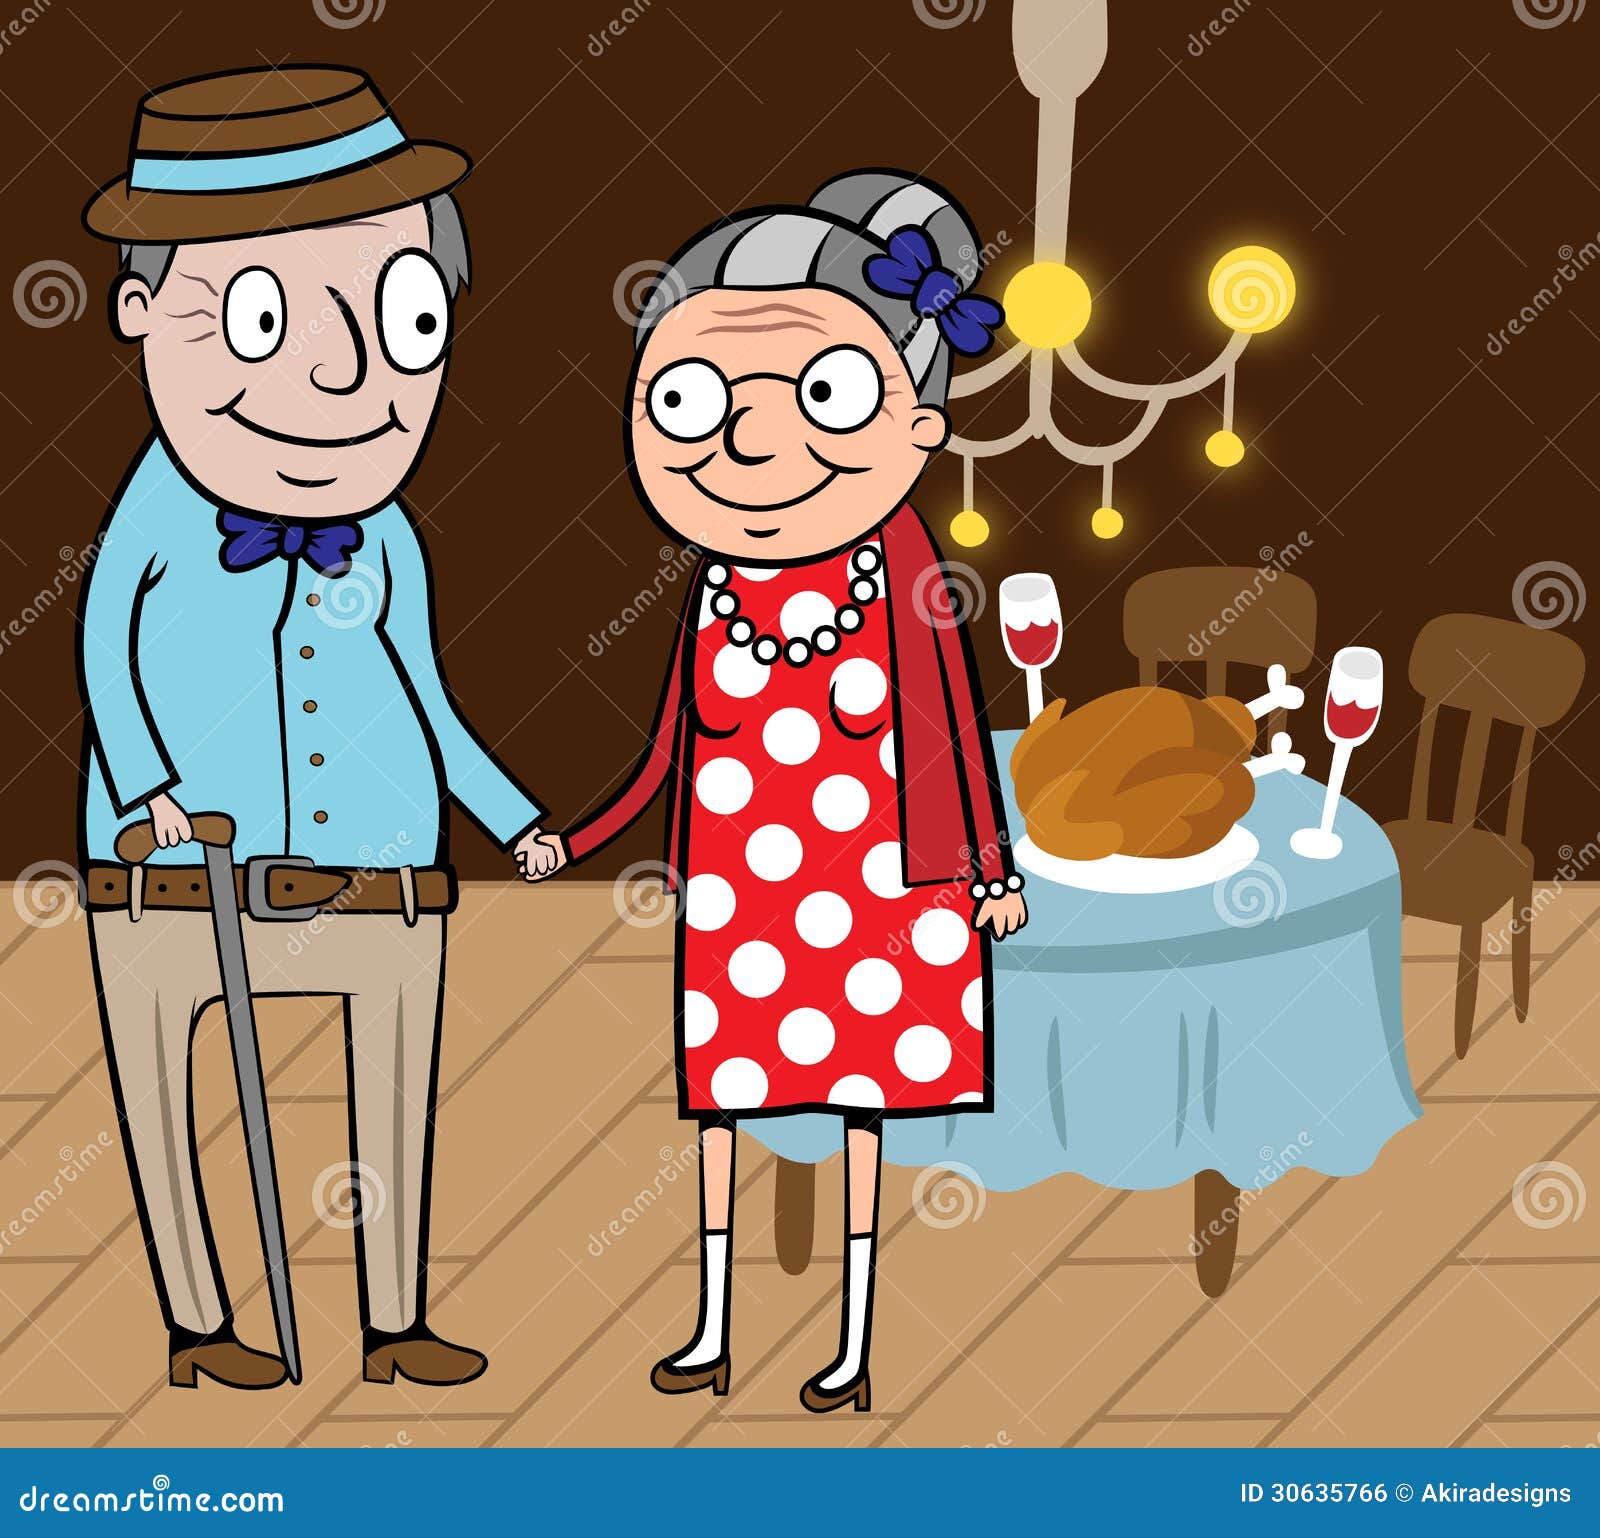 clip art funny old couple - photo #8